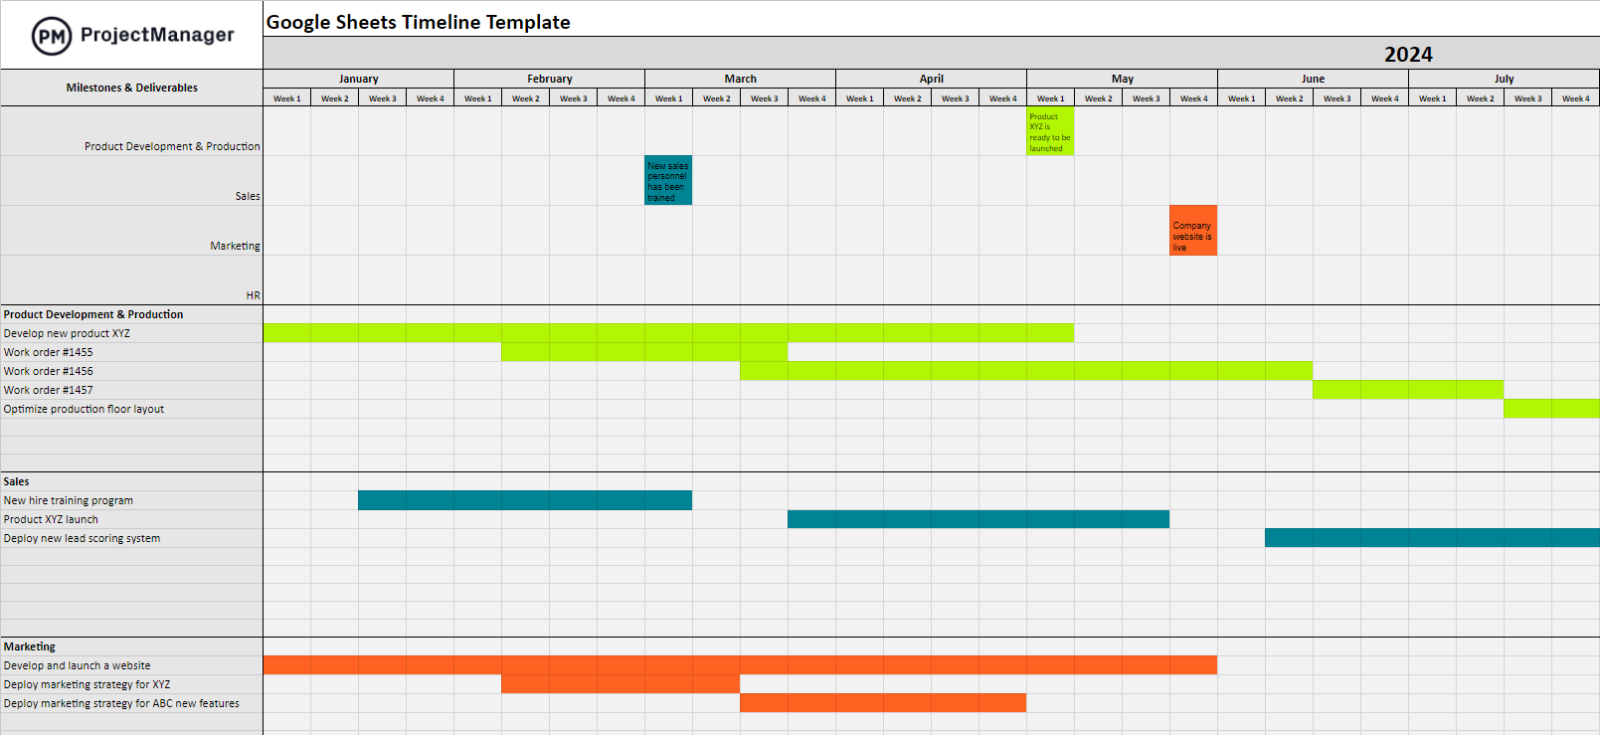 ProjectManager's timeline template for Google Sheets